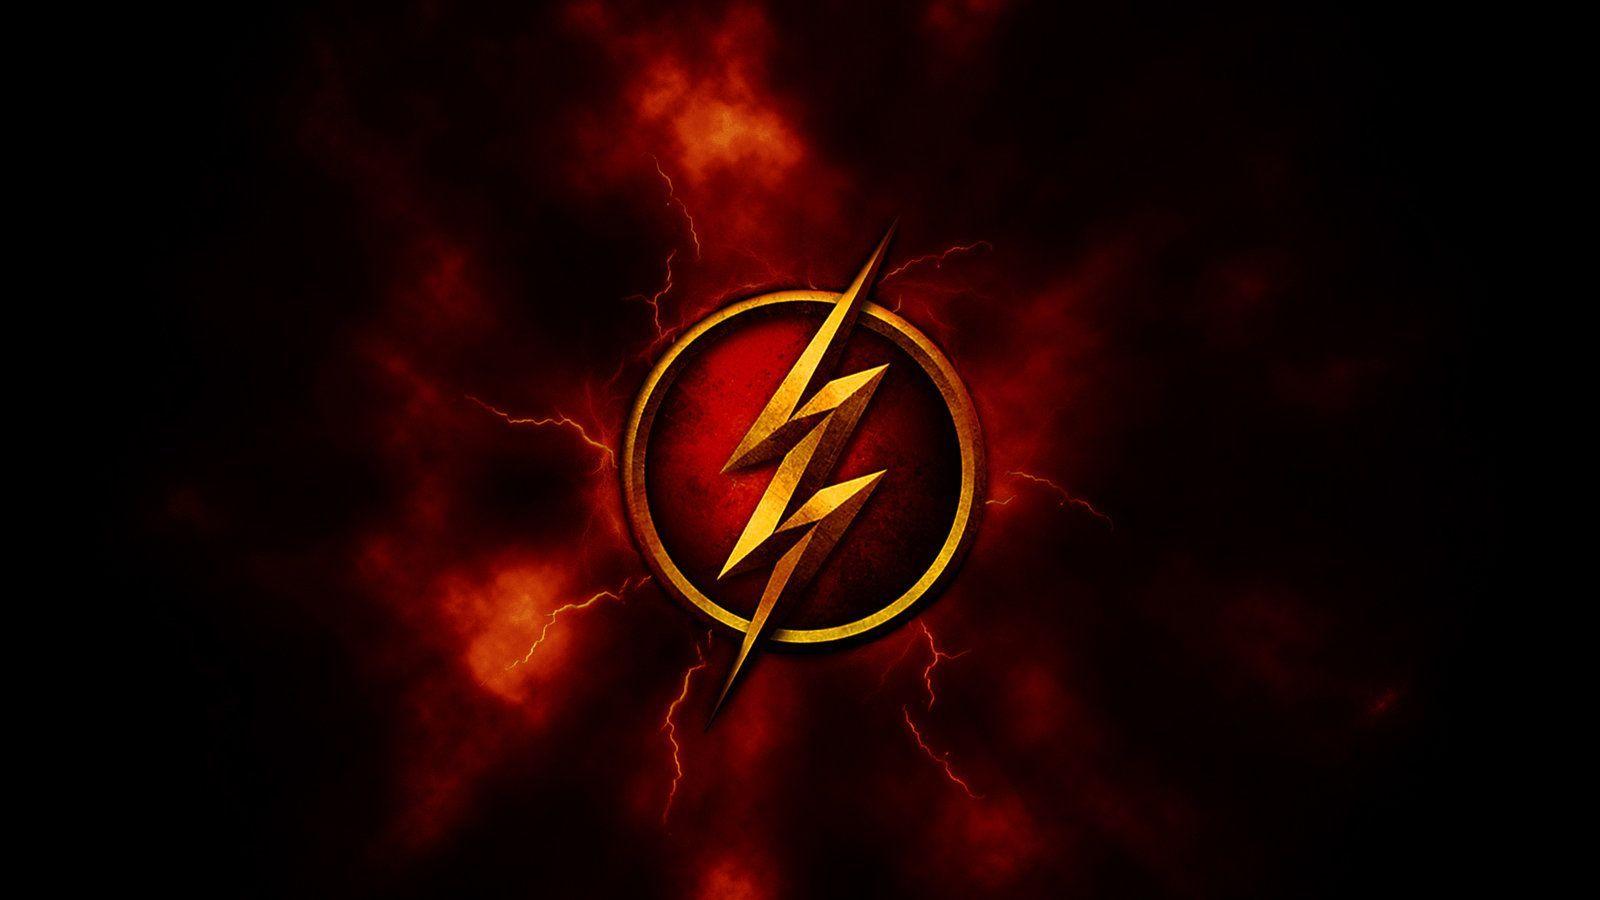 The Flash Wallpapers - Top Best The Flash Backgrounds Download